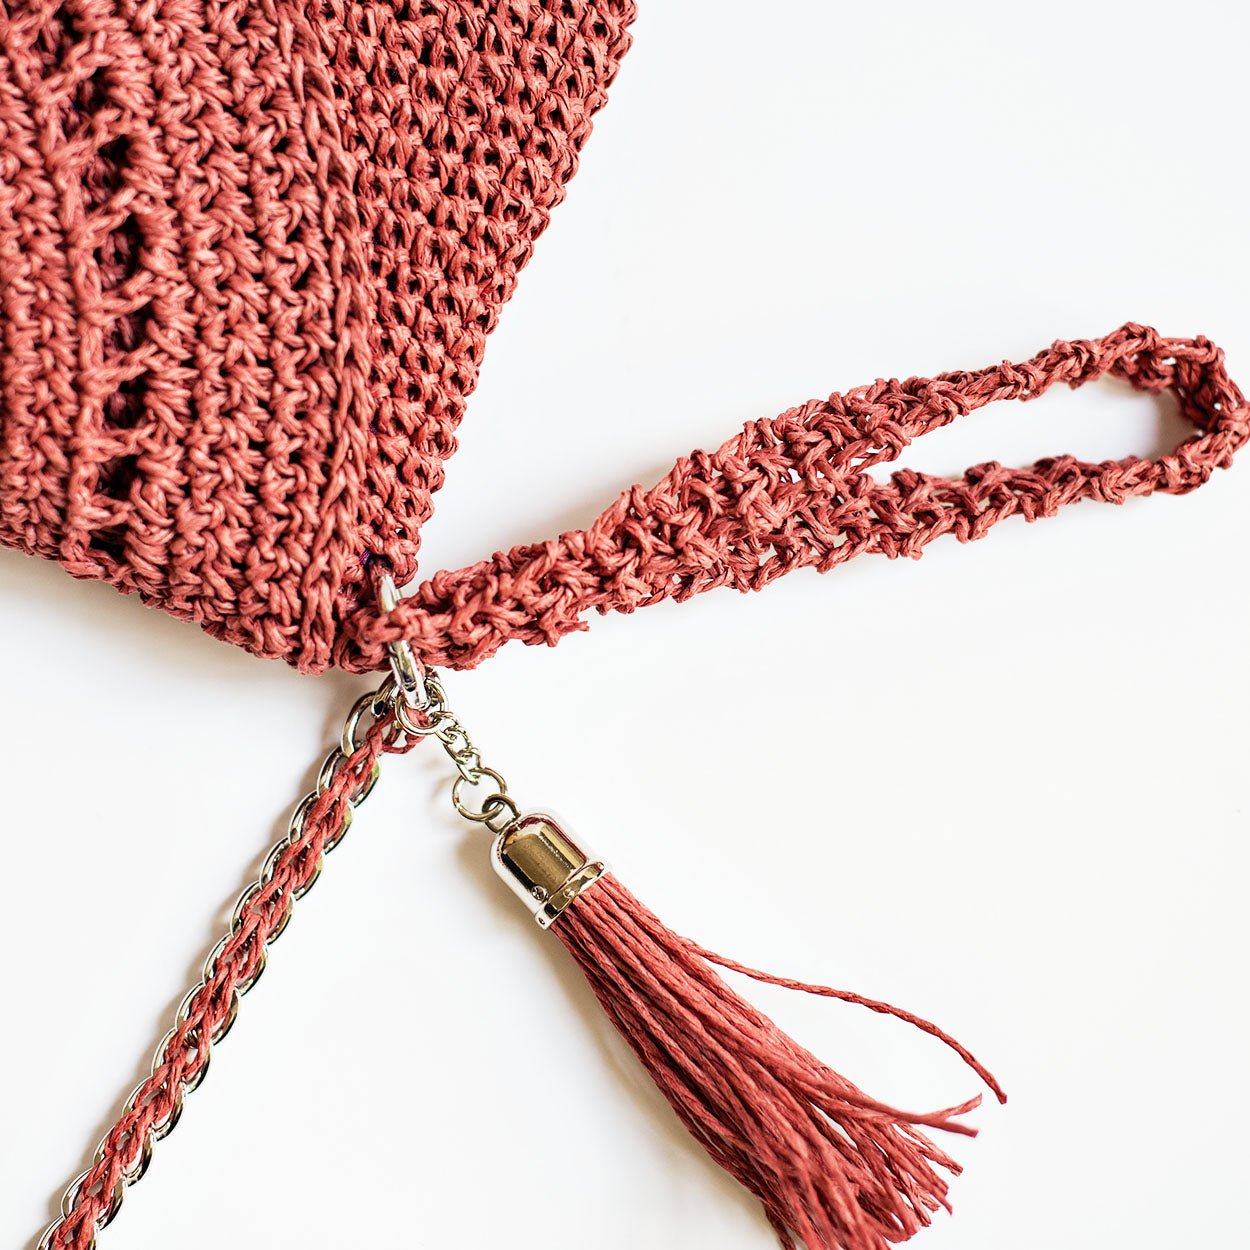 Grace Bag hand crocheted with sustainable paper yarn - Peach - SJW BAGS LONDON